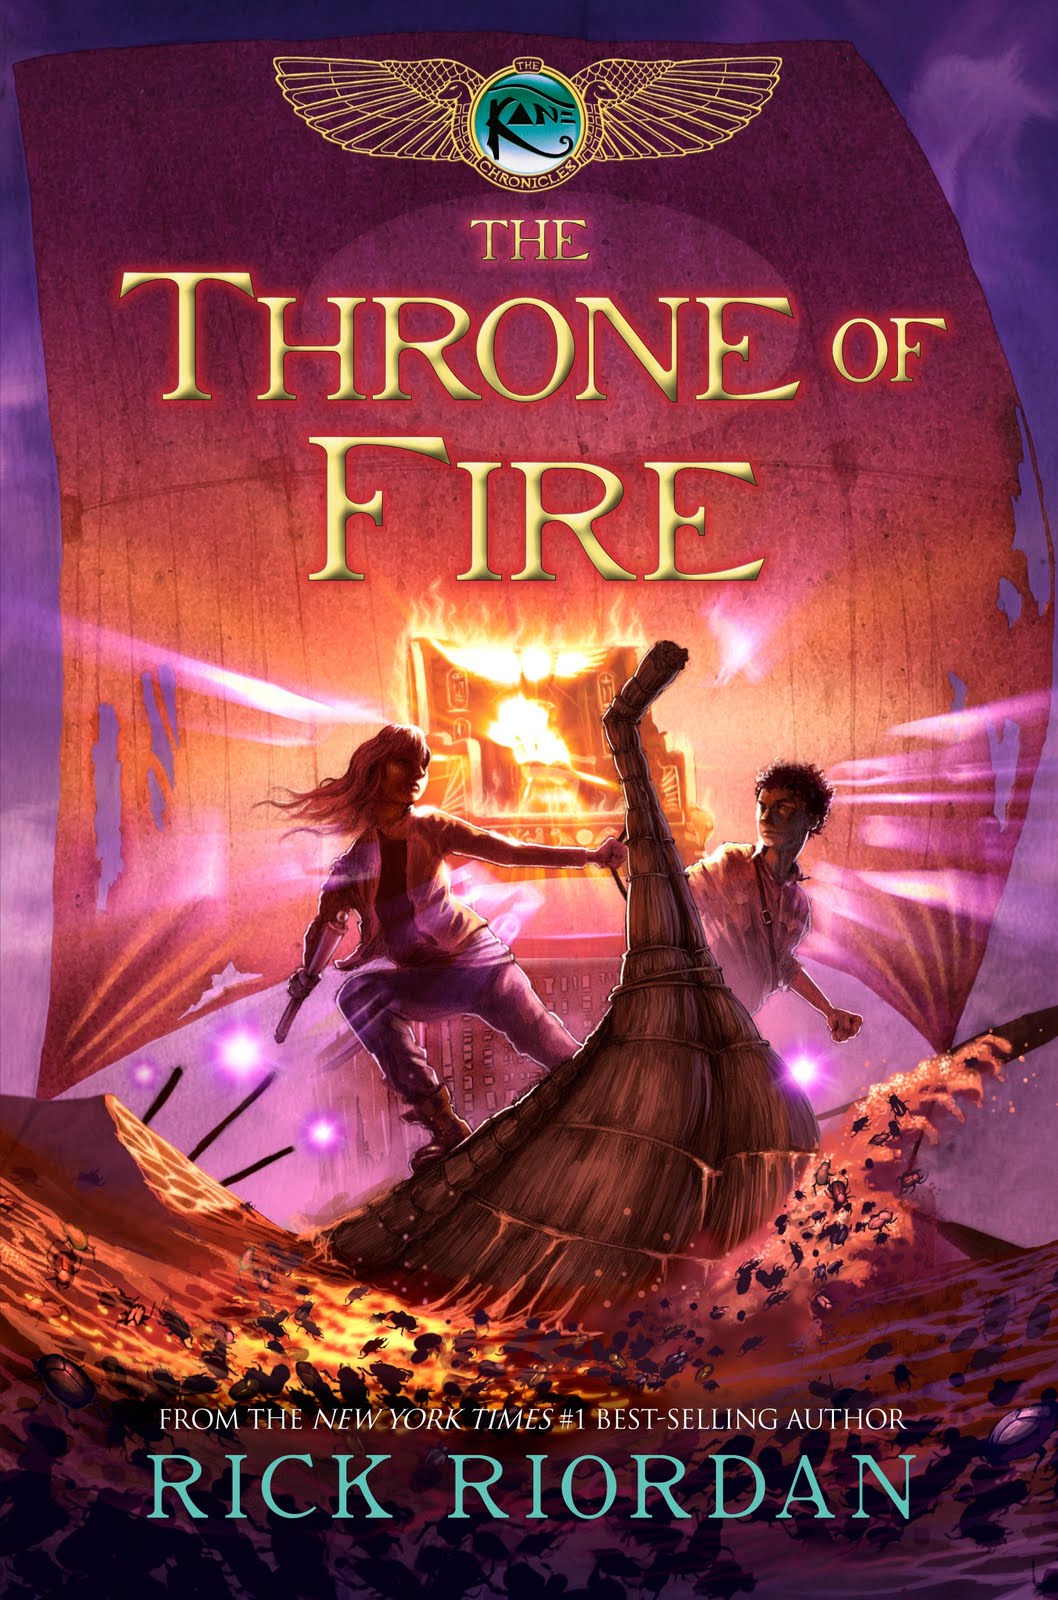 Book review: The Throne of Fire